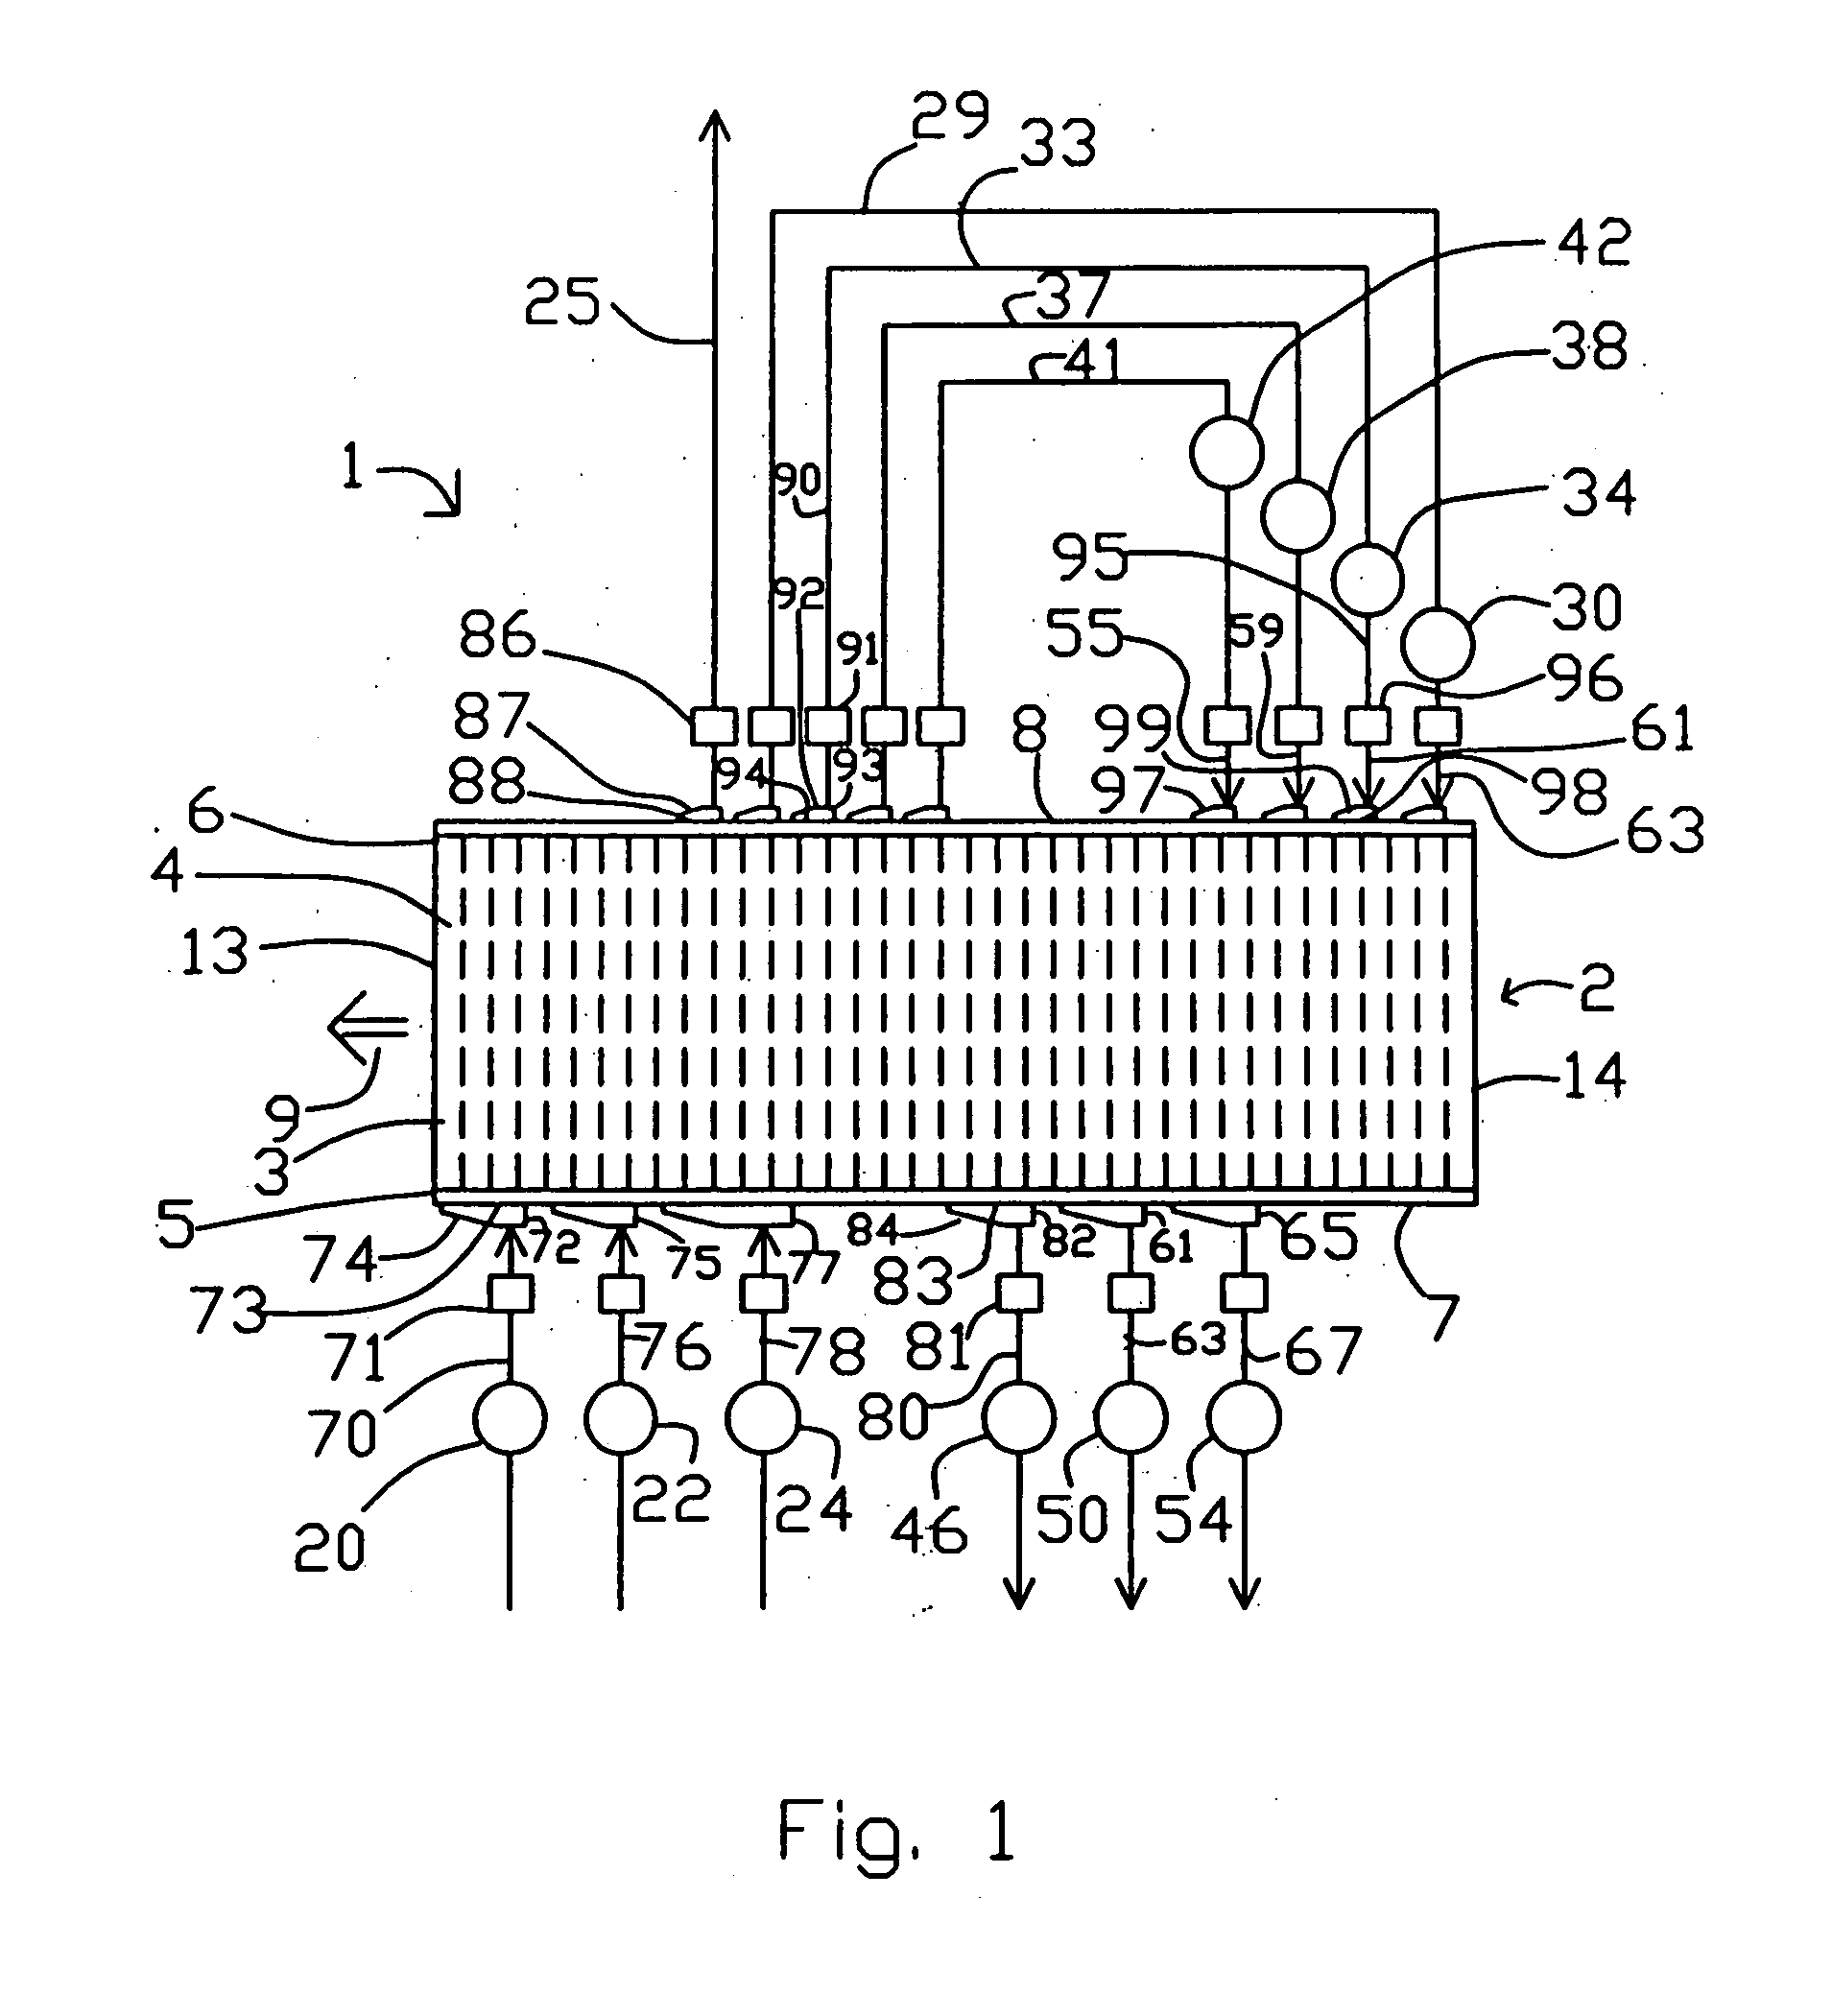 Chemical reactor with pressure swing adsorption